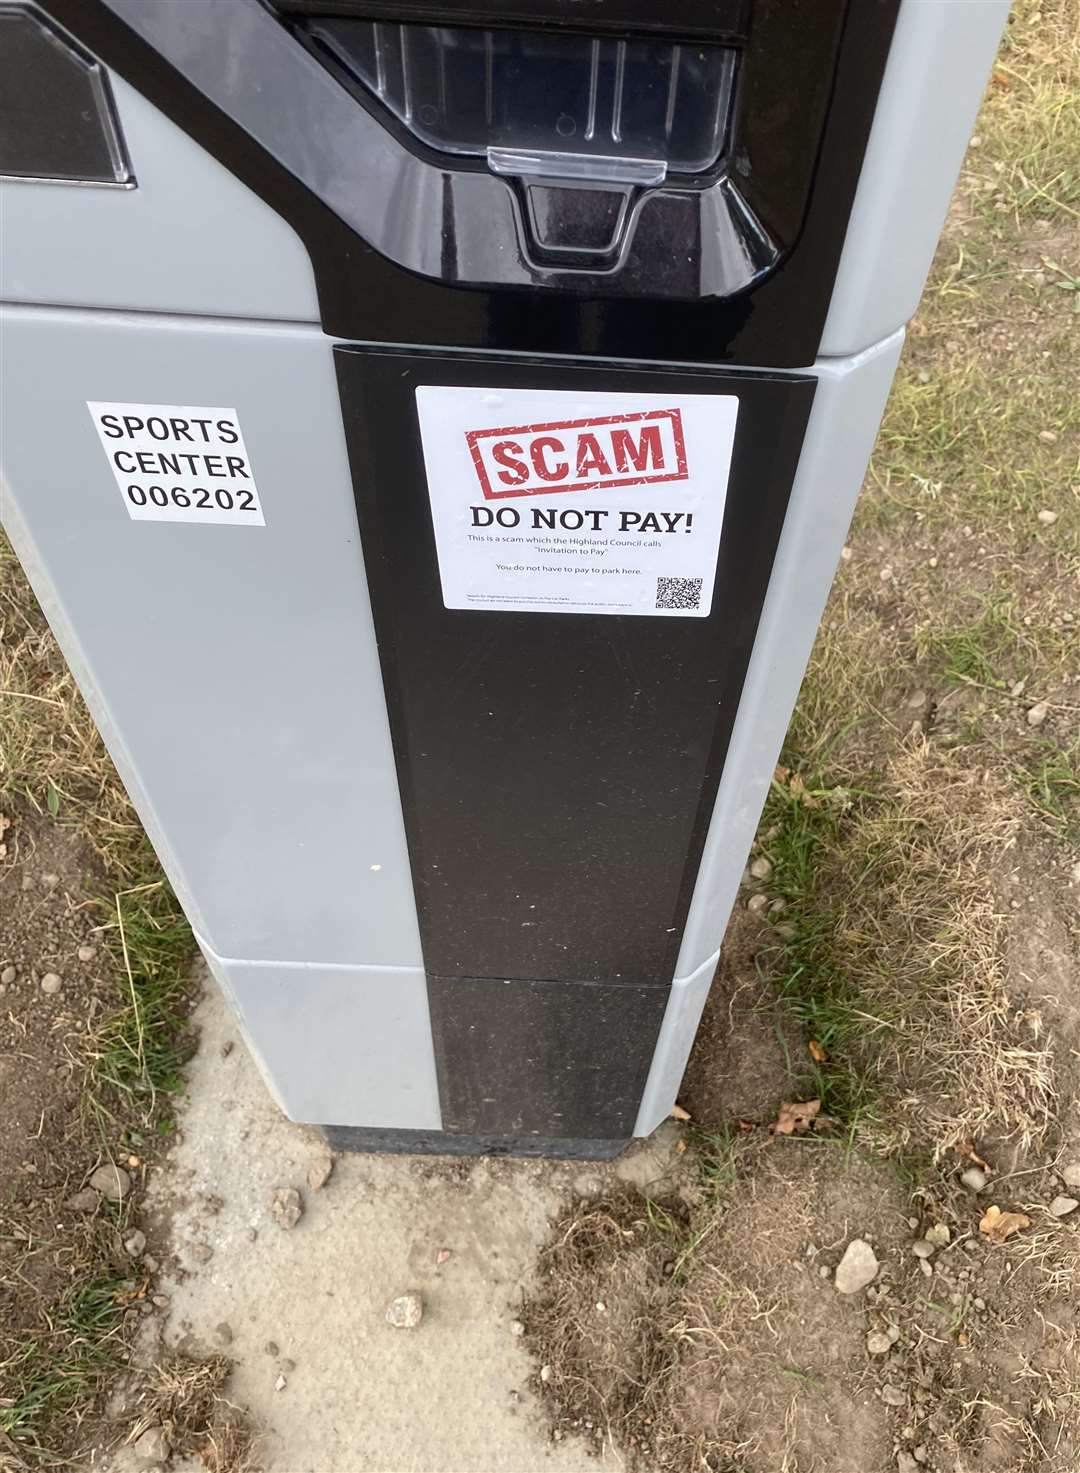 One of the stickers placed on a parking meter in Inverness.